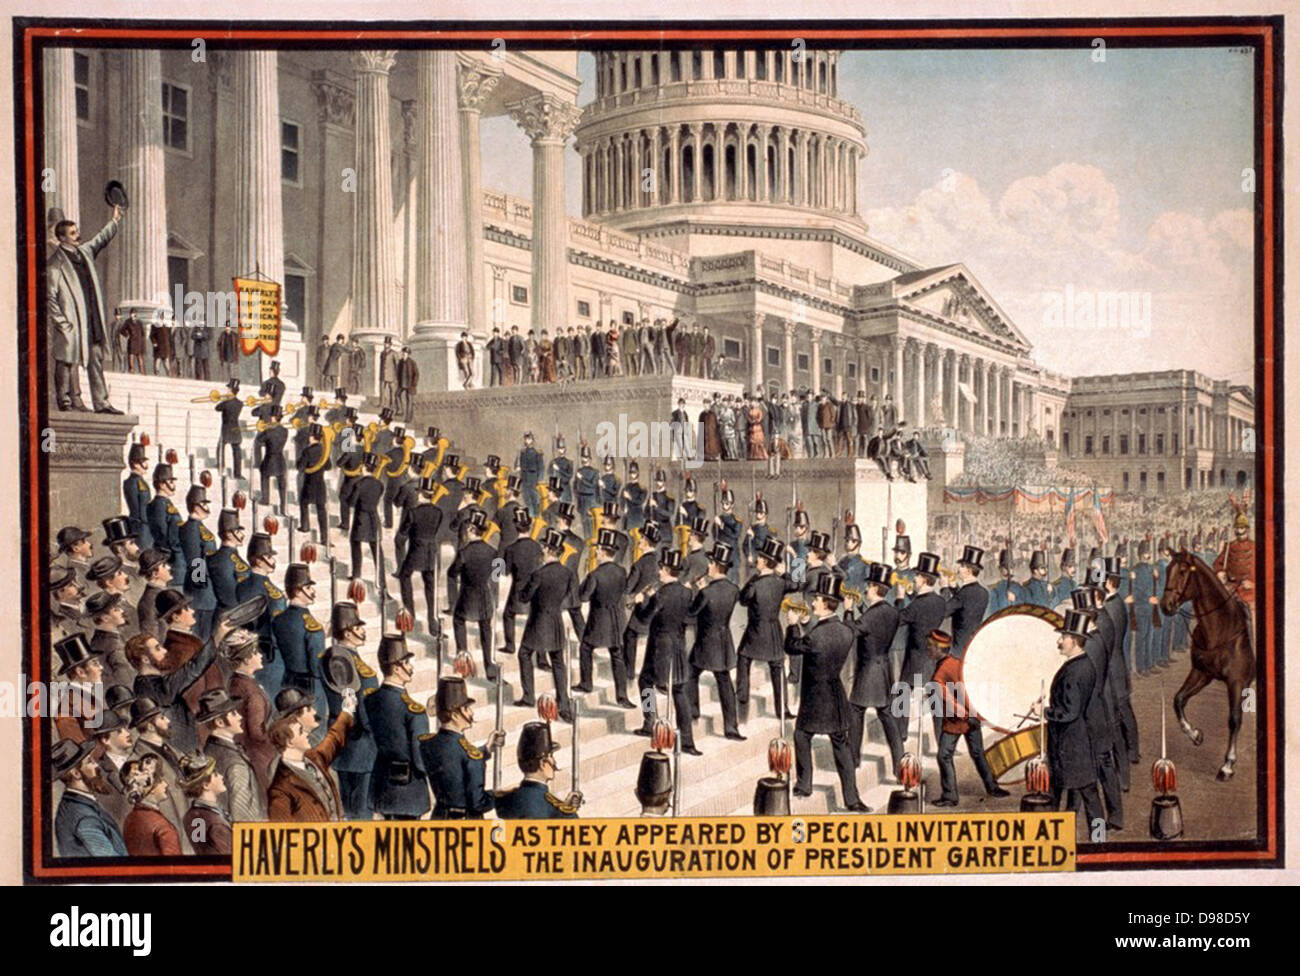 Haverley's Minstrels as they appeared by special invitation at the inauguration of President Garfield. The band ascending the steps of the Capitol building, Washington, 1891. Chromolithograph. Stock Photo